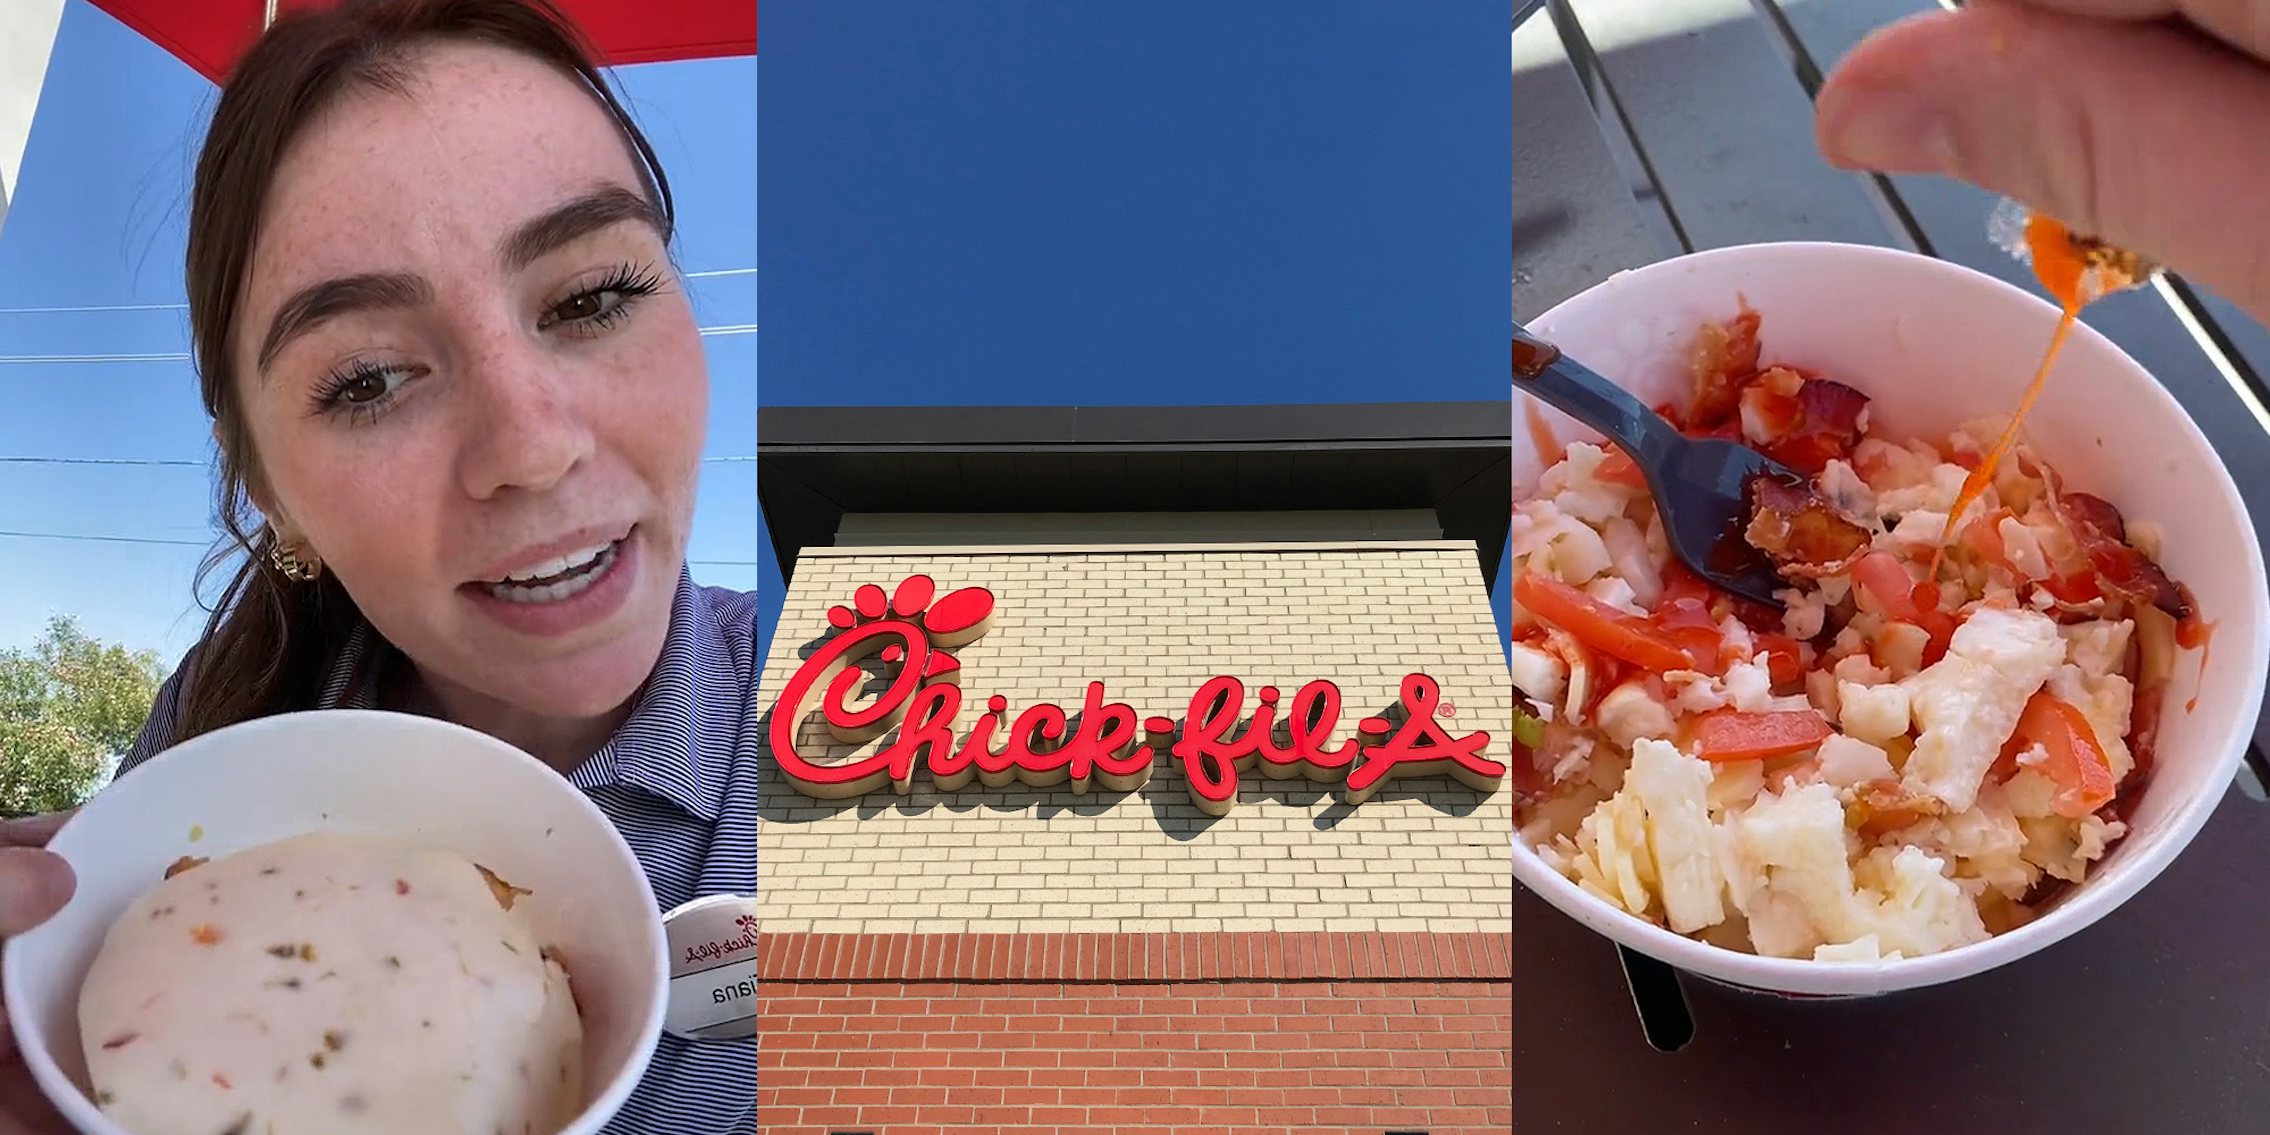 Chick-Fil-A employee speaking with eggs in bowl (l) Chick-Fil-A sign on building with blue sky (c) Chick-Fil-A breakfast bowl hack with sauce being poured on top (r)